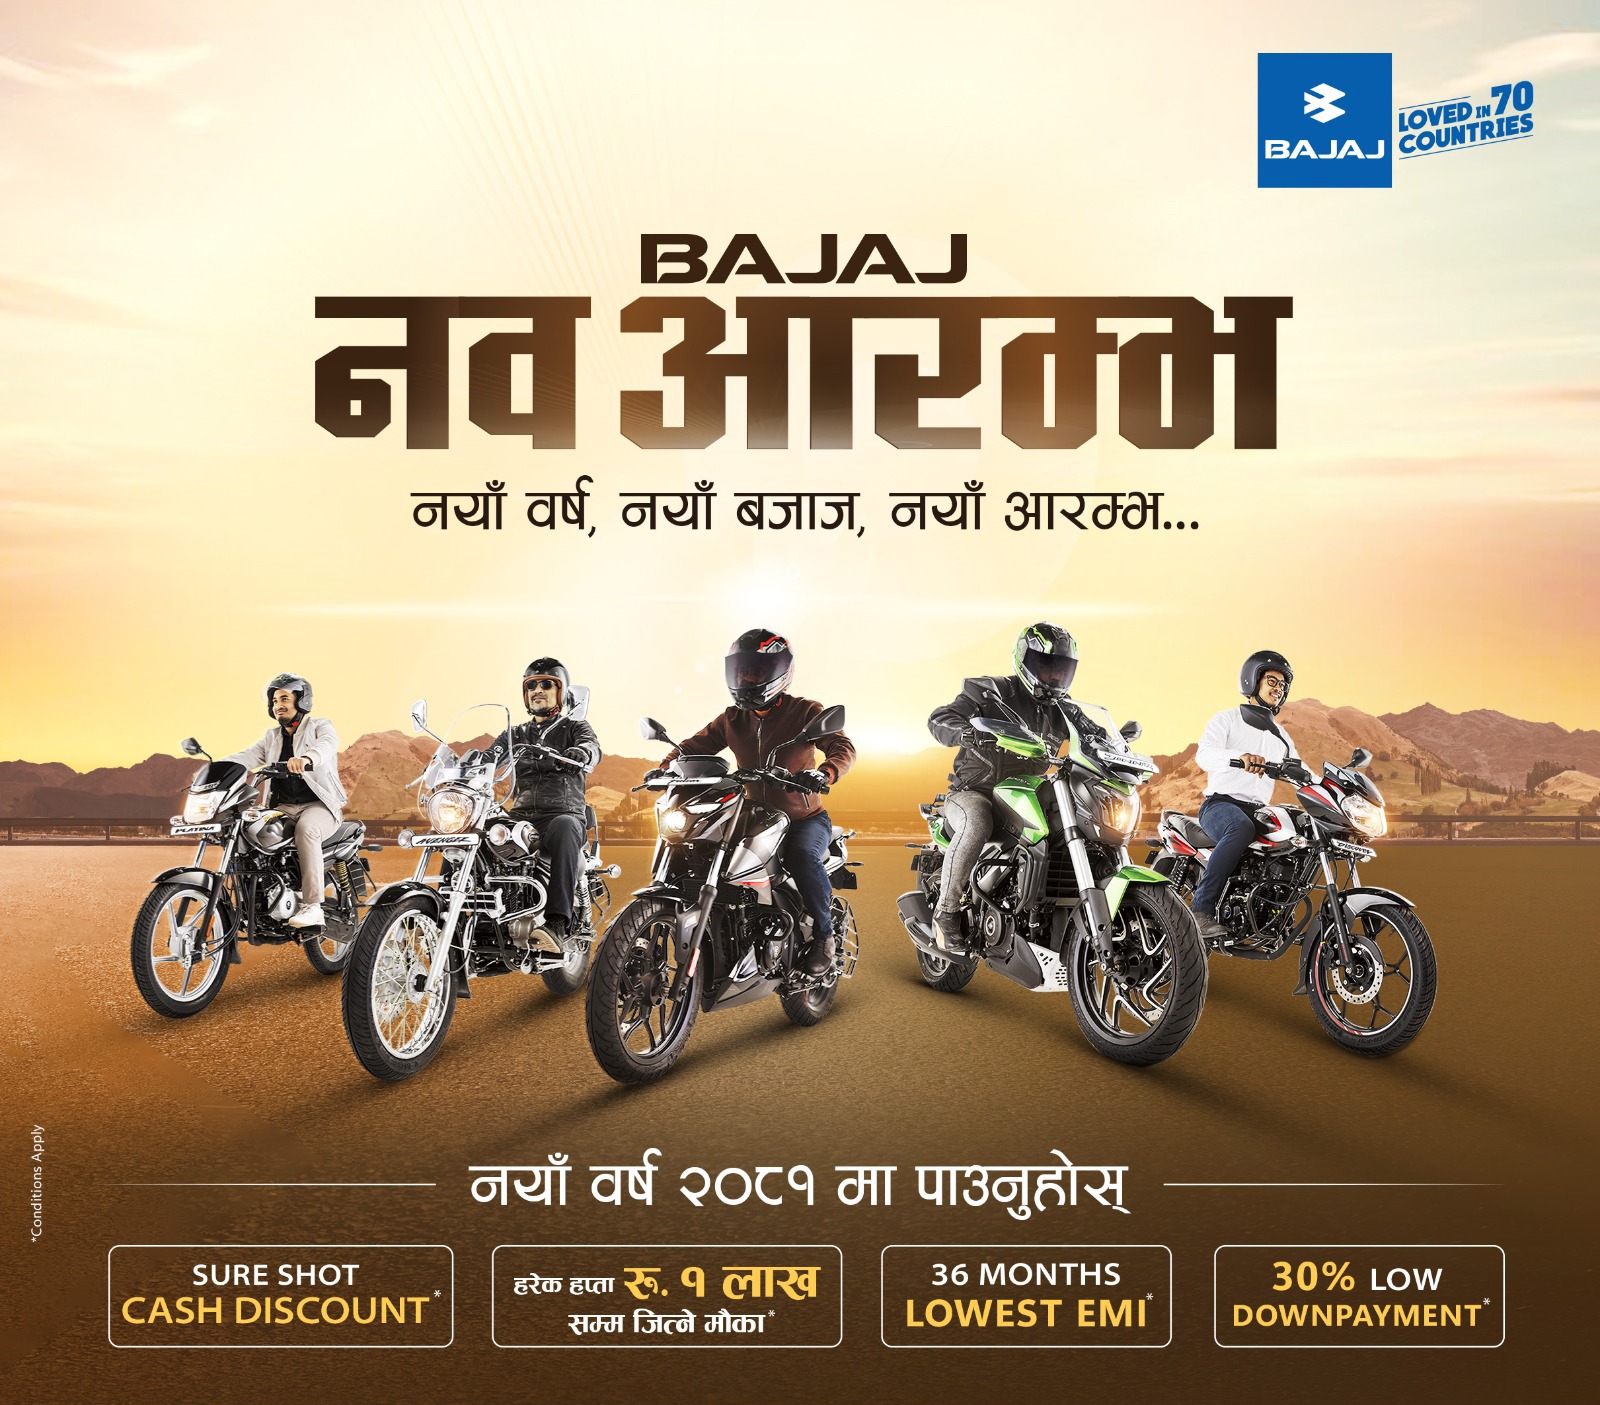 Bajaj to give up to Rs.1 lakh cash prize this New Year